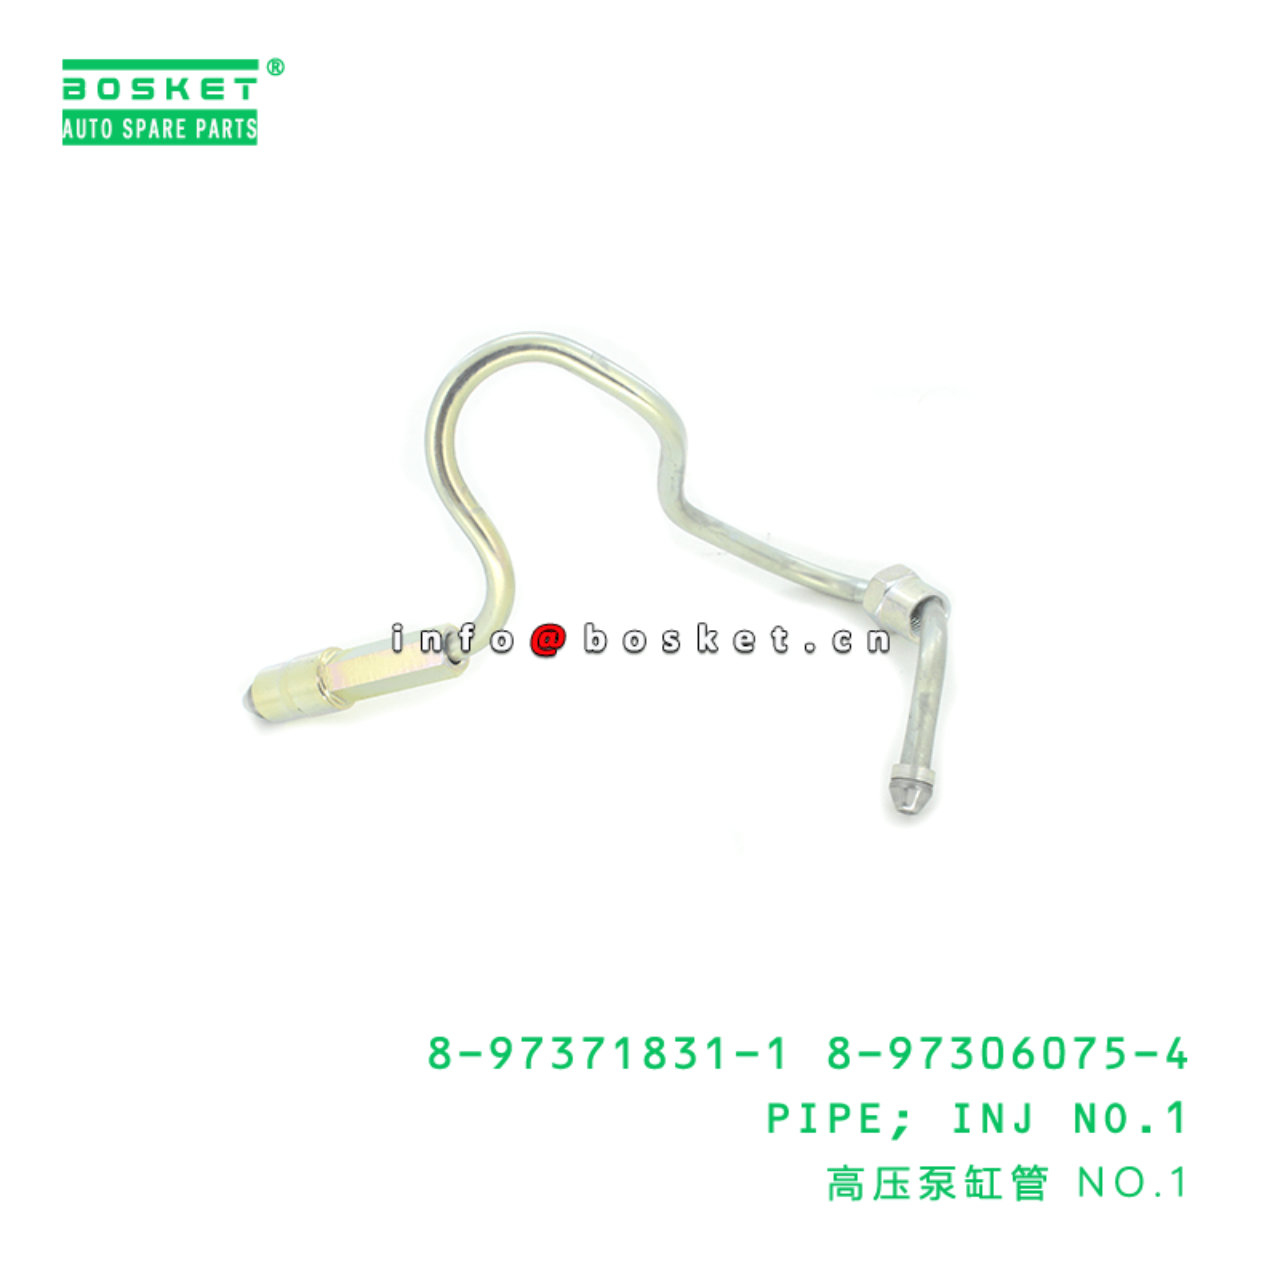 8-97371831-1 8-97306075-4 Injection No.1 Pipe 8973718311 8973060754 Suitable for ISUZU NPR 4HK1